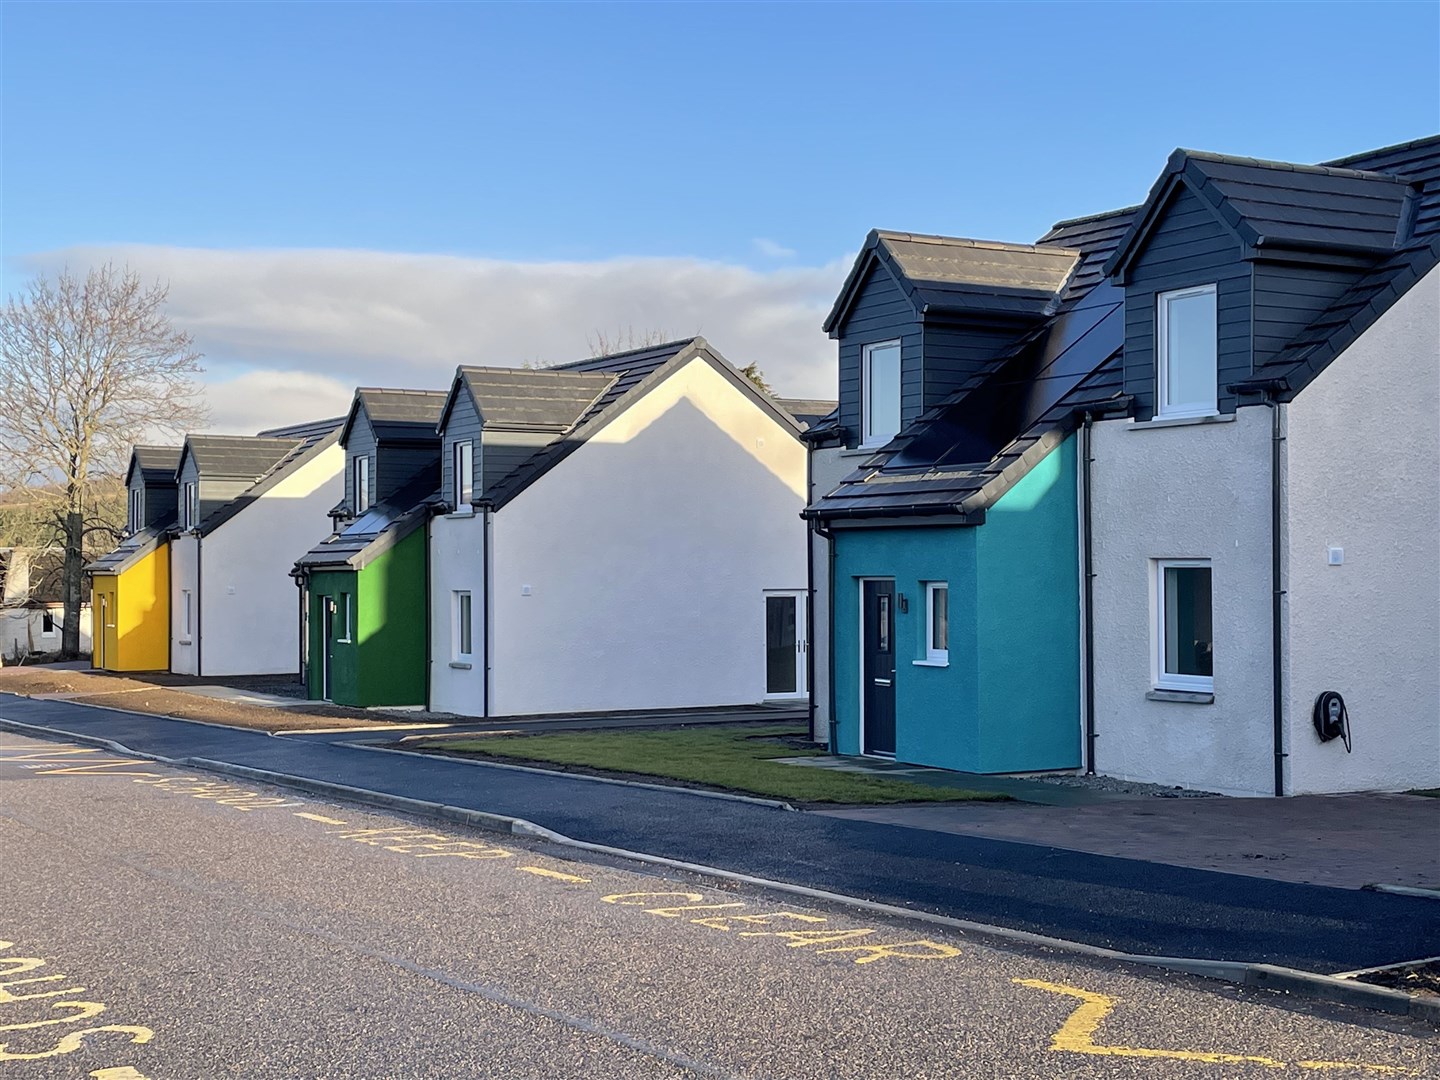 The 12 new homes have been built on time and to the agreed budget.